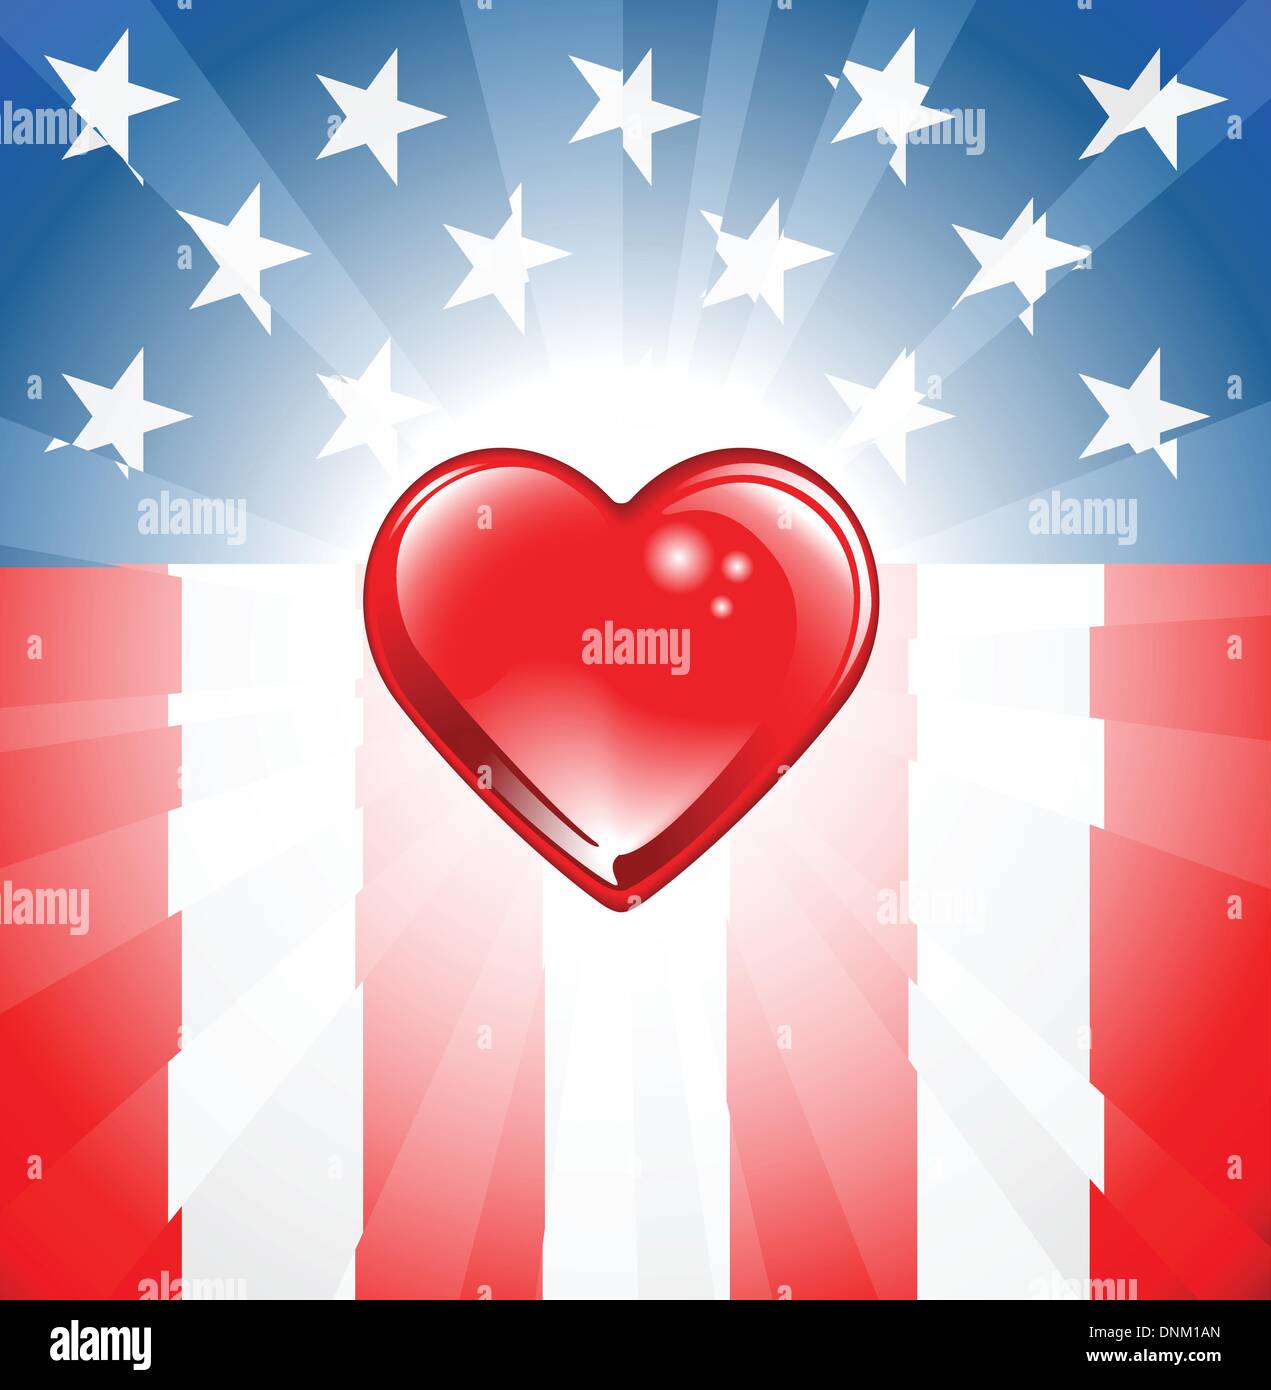 A background featuring Heart shape and stars and stripes background Stock Vector